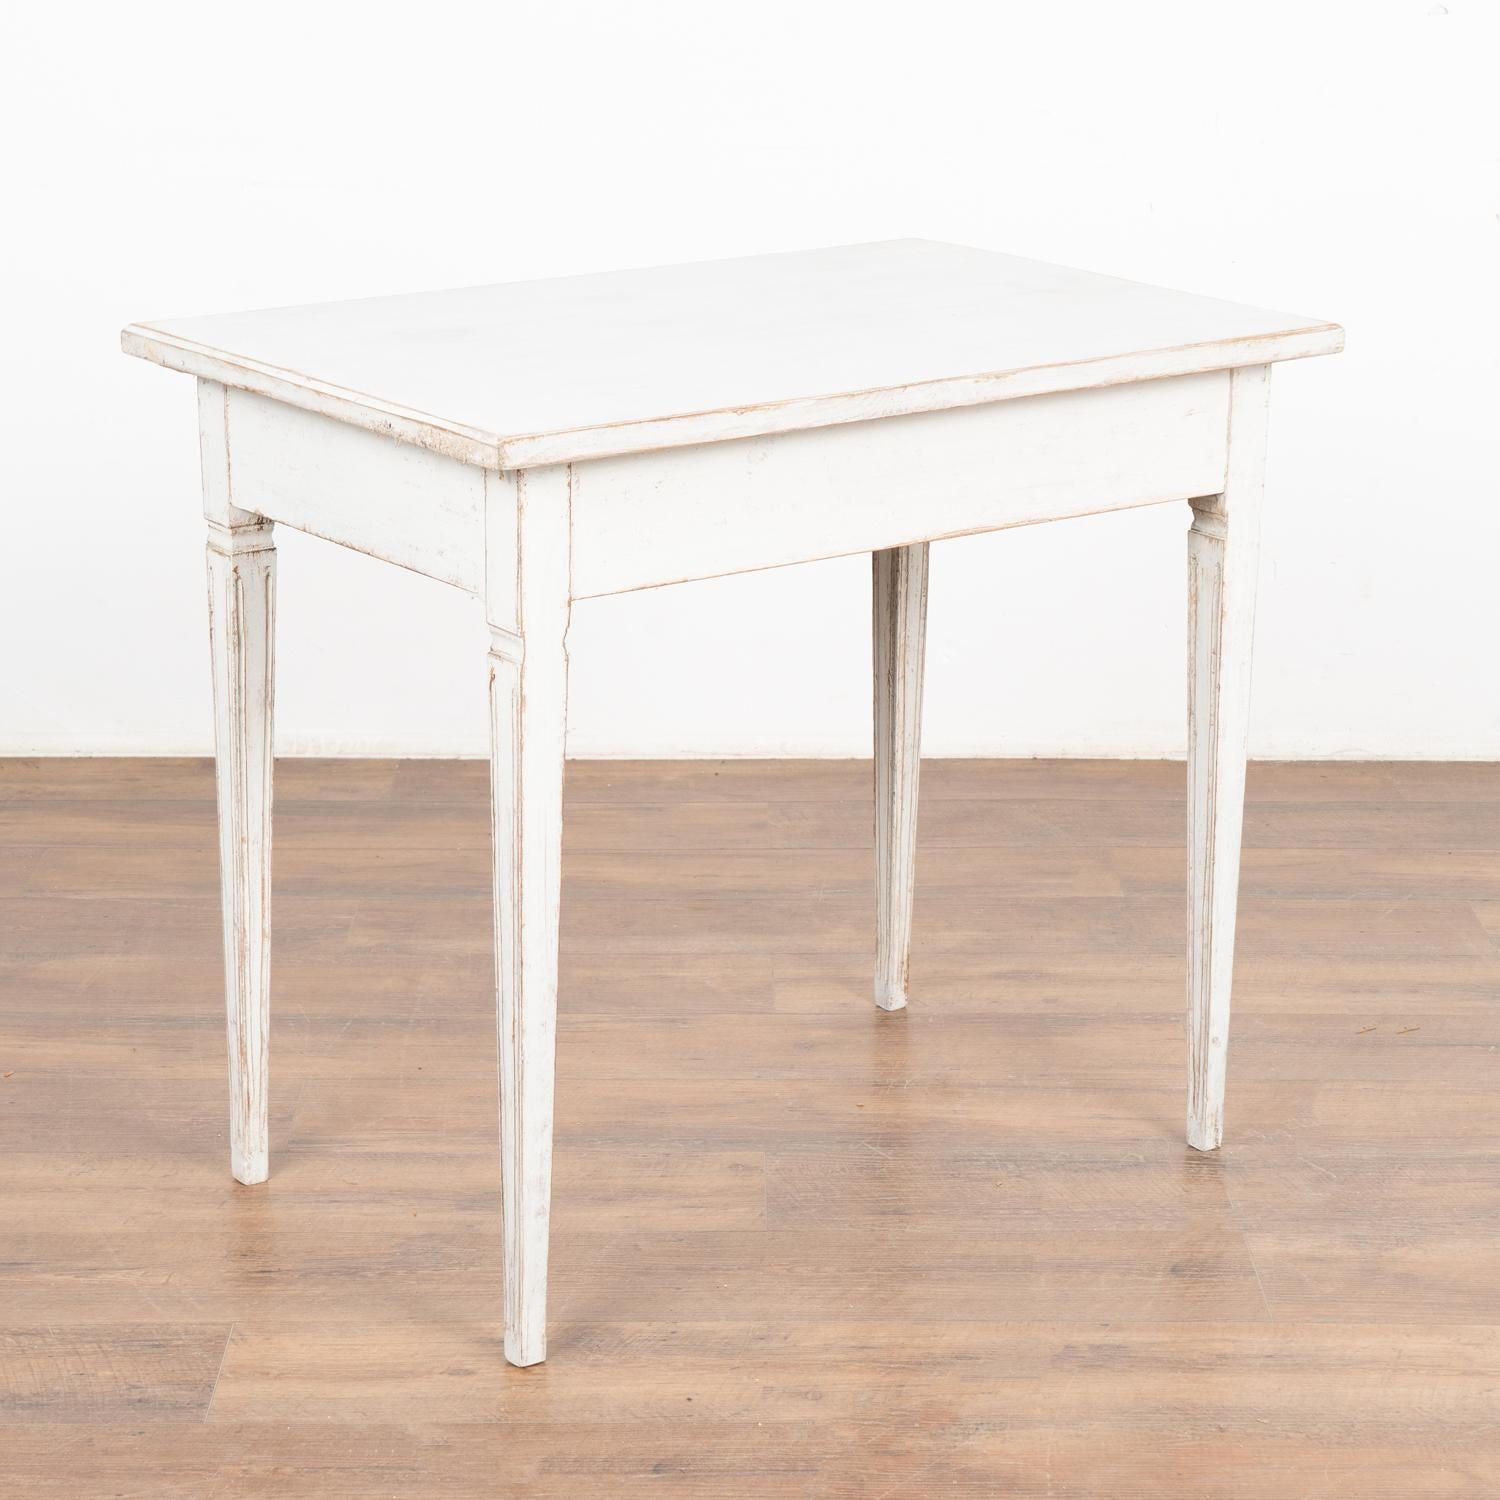 Antique Swedish Gustavian White Painted Side Table With Drawer, circa 1860-80 For Sale 5